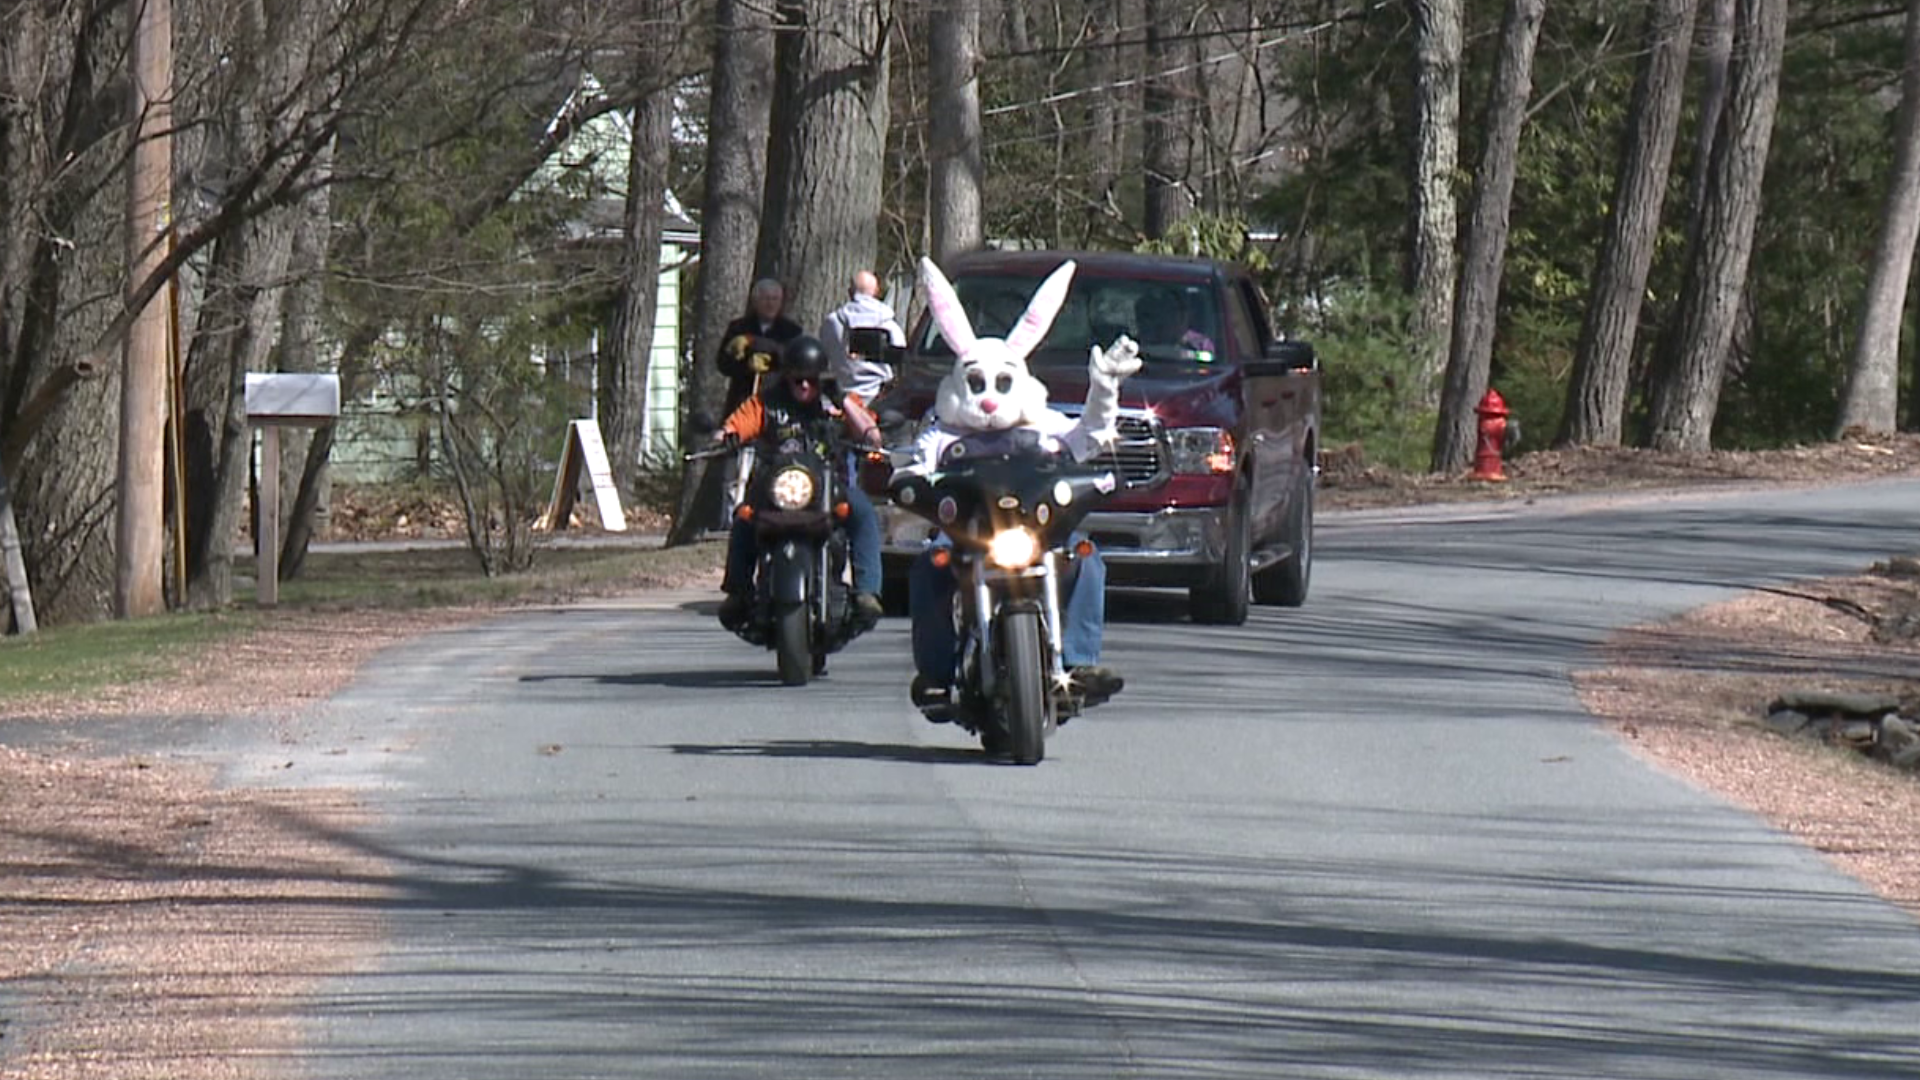 The Easter Bunny took a ride through Barrett Township on Saturday.